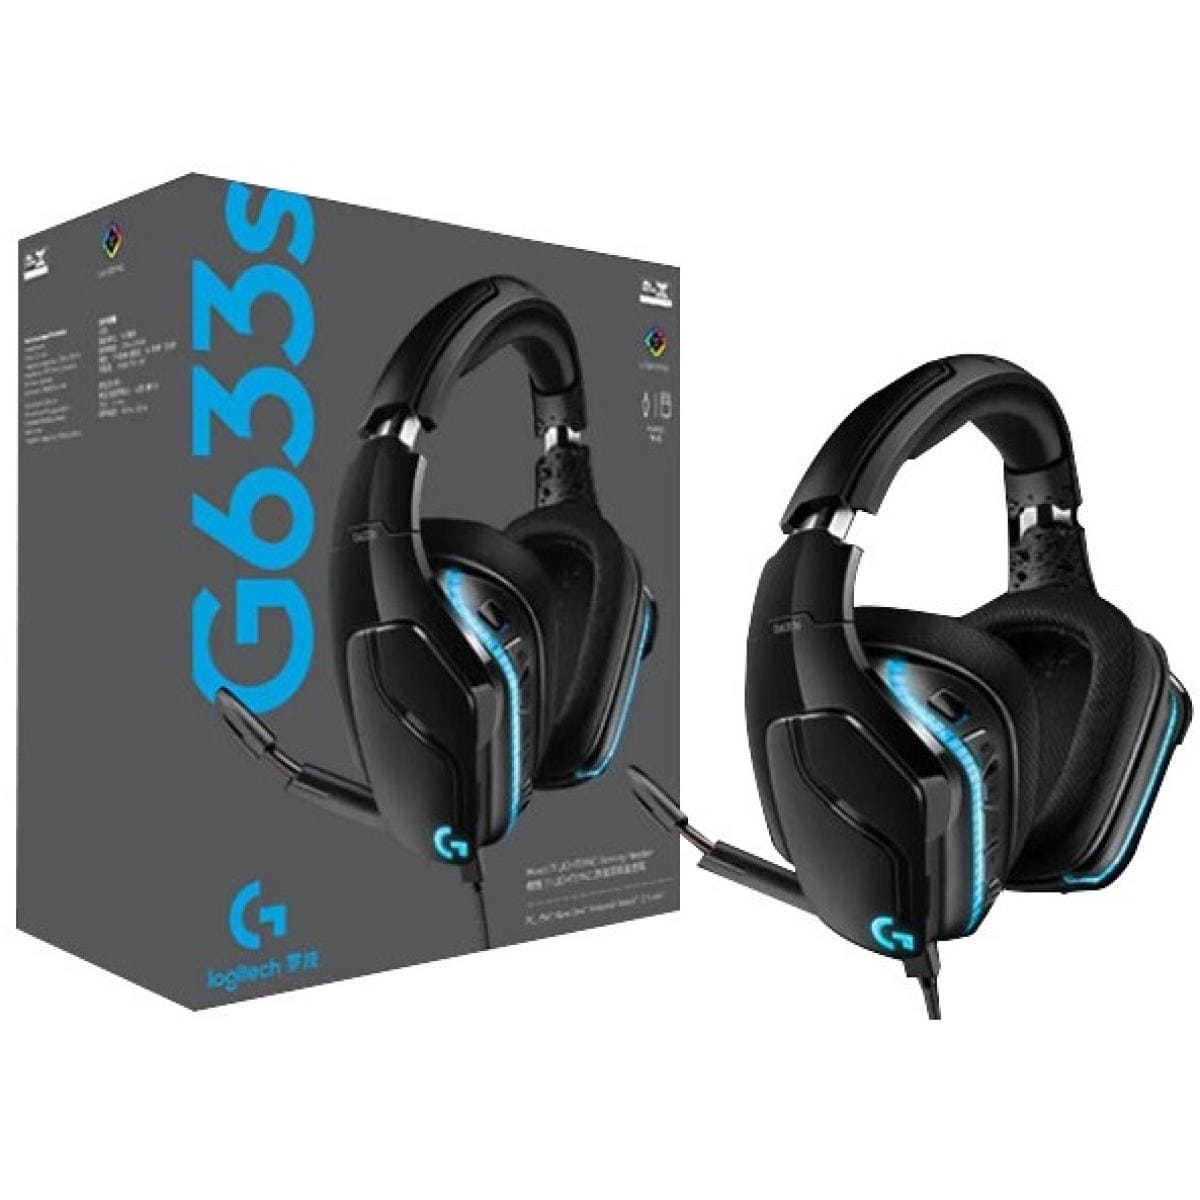 Microsoft Surface surface Logitech G633s RGB Wired Gaming Headset, USB (DTS Headphone:X 2.0) 7.1 Surround Sound , Flip-to-Mute Mic, Swivel, Multi Platform Support (3.5mm)